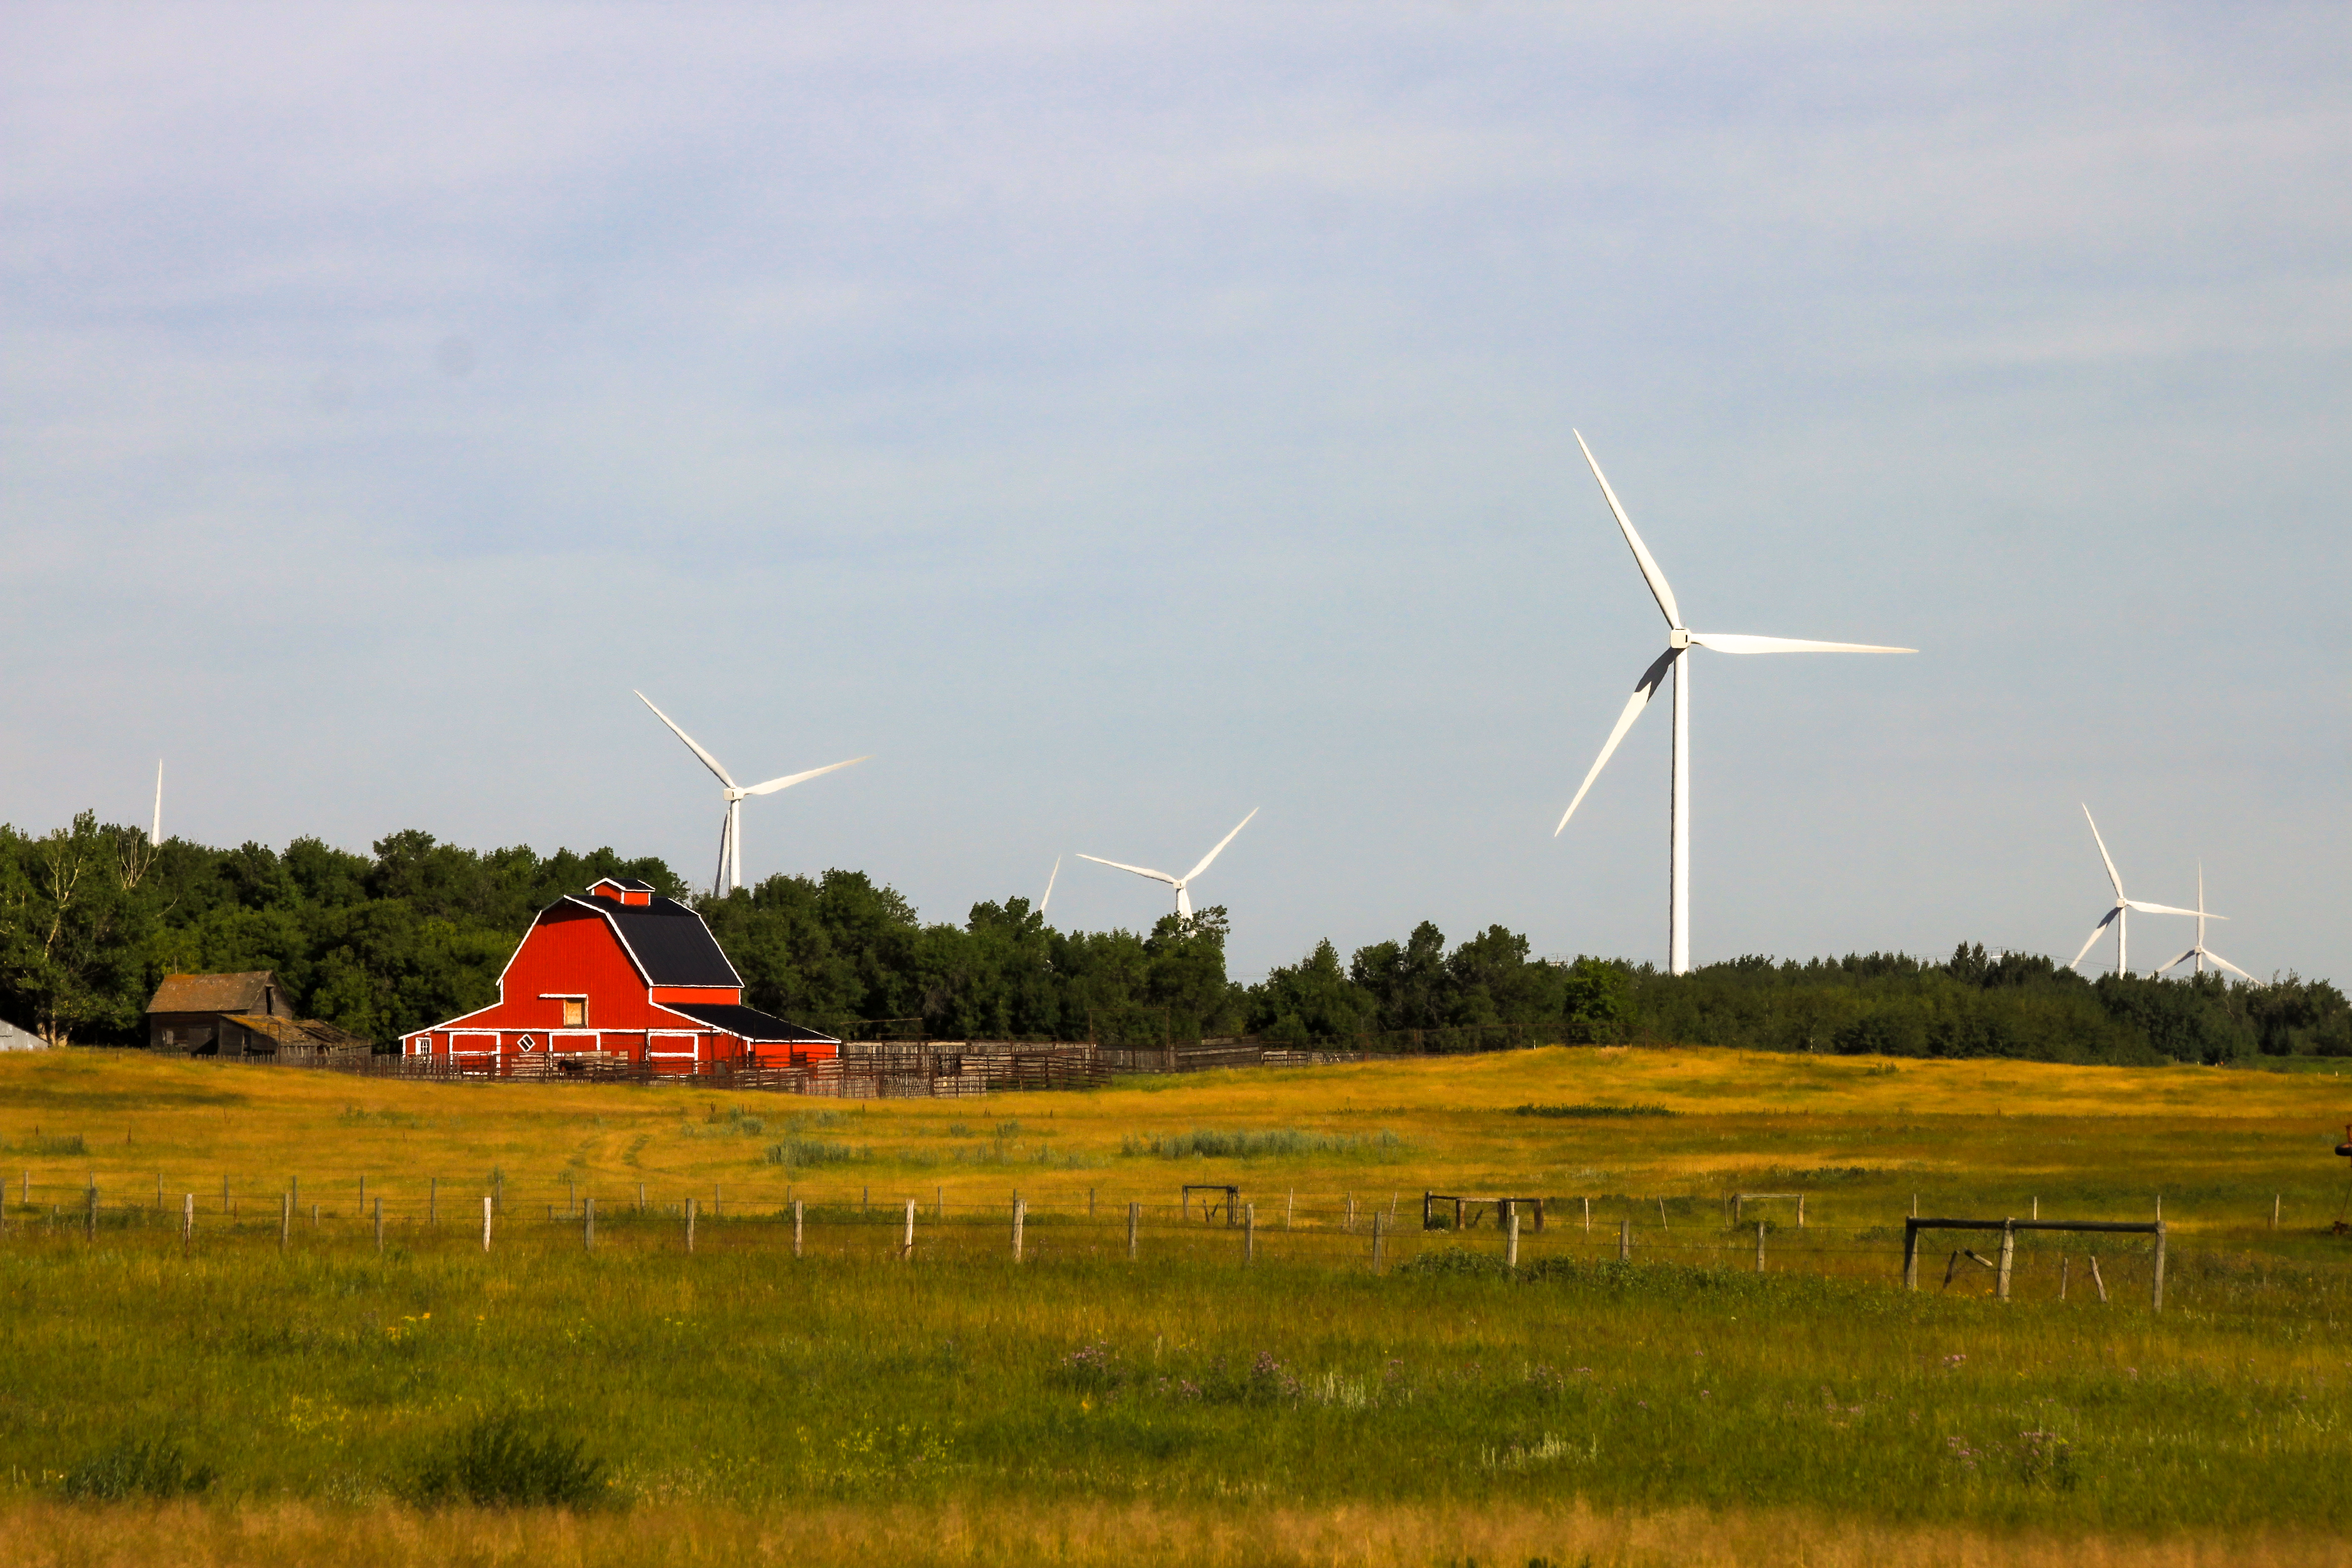 Wind turbines behind a barn on a rural field with trees surounding